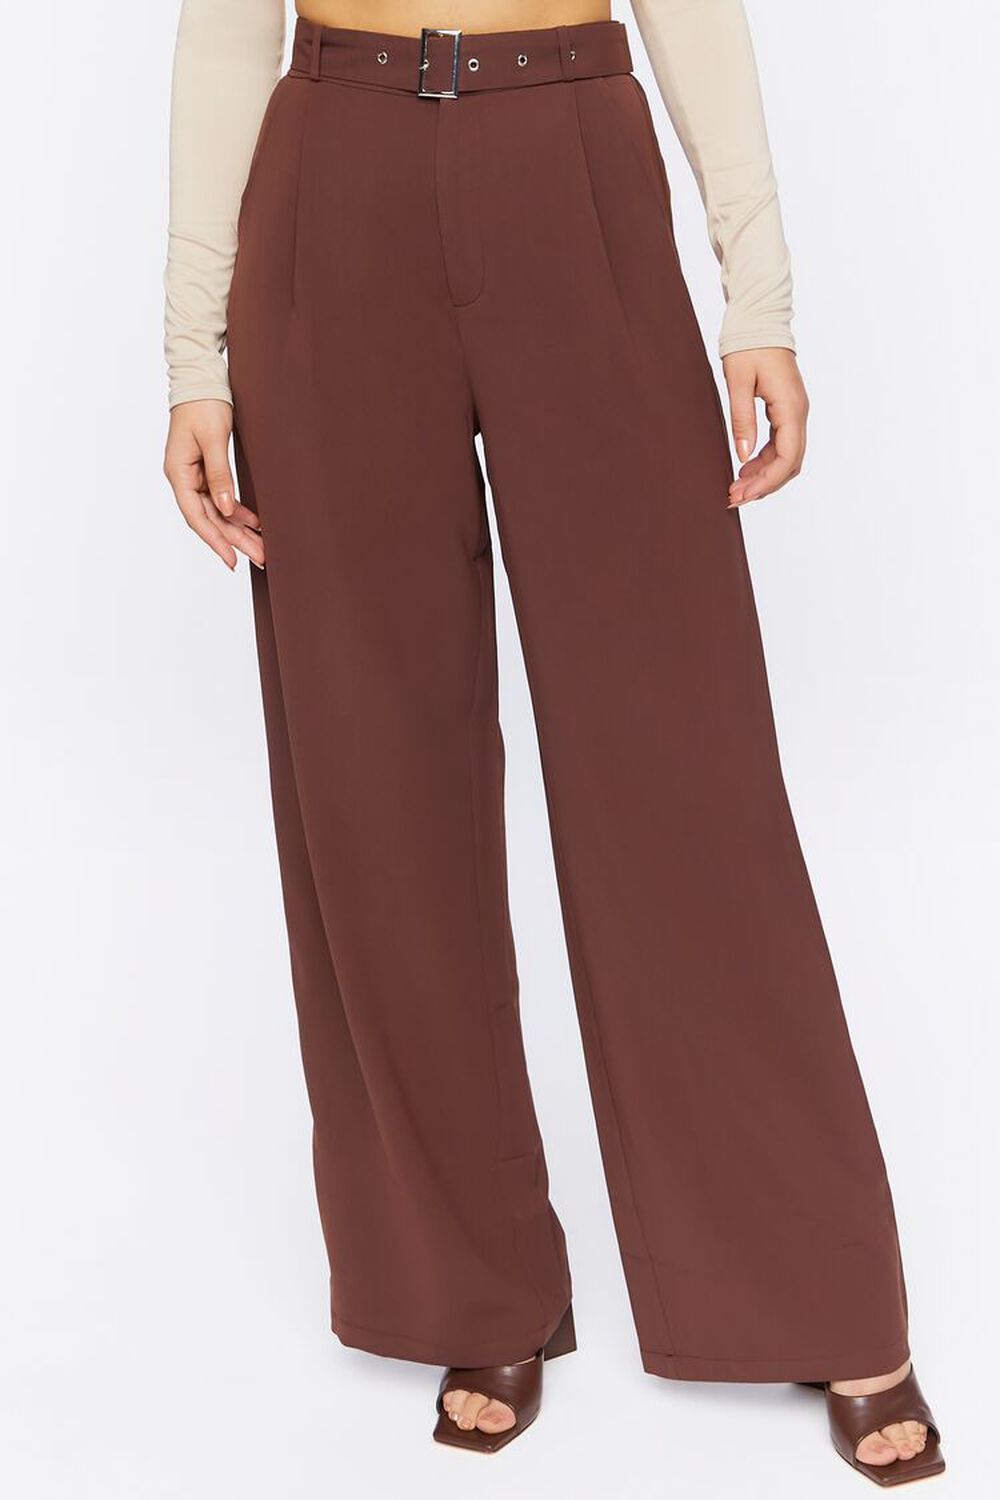 BROWN Belted Wide-Leg Trousers, image 2